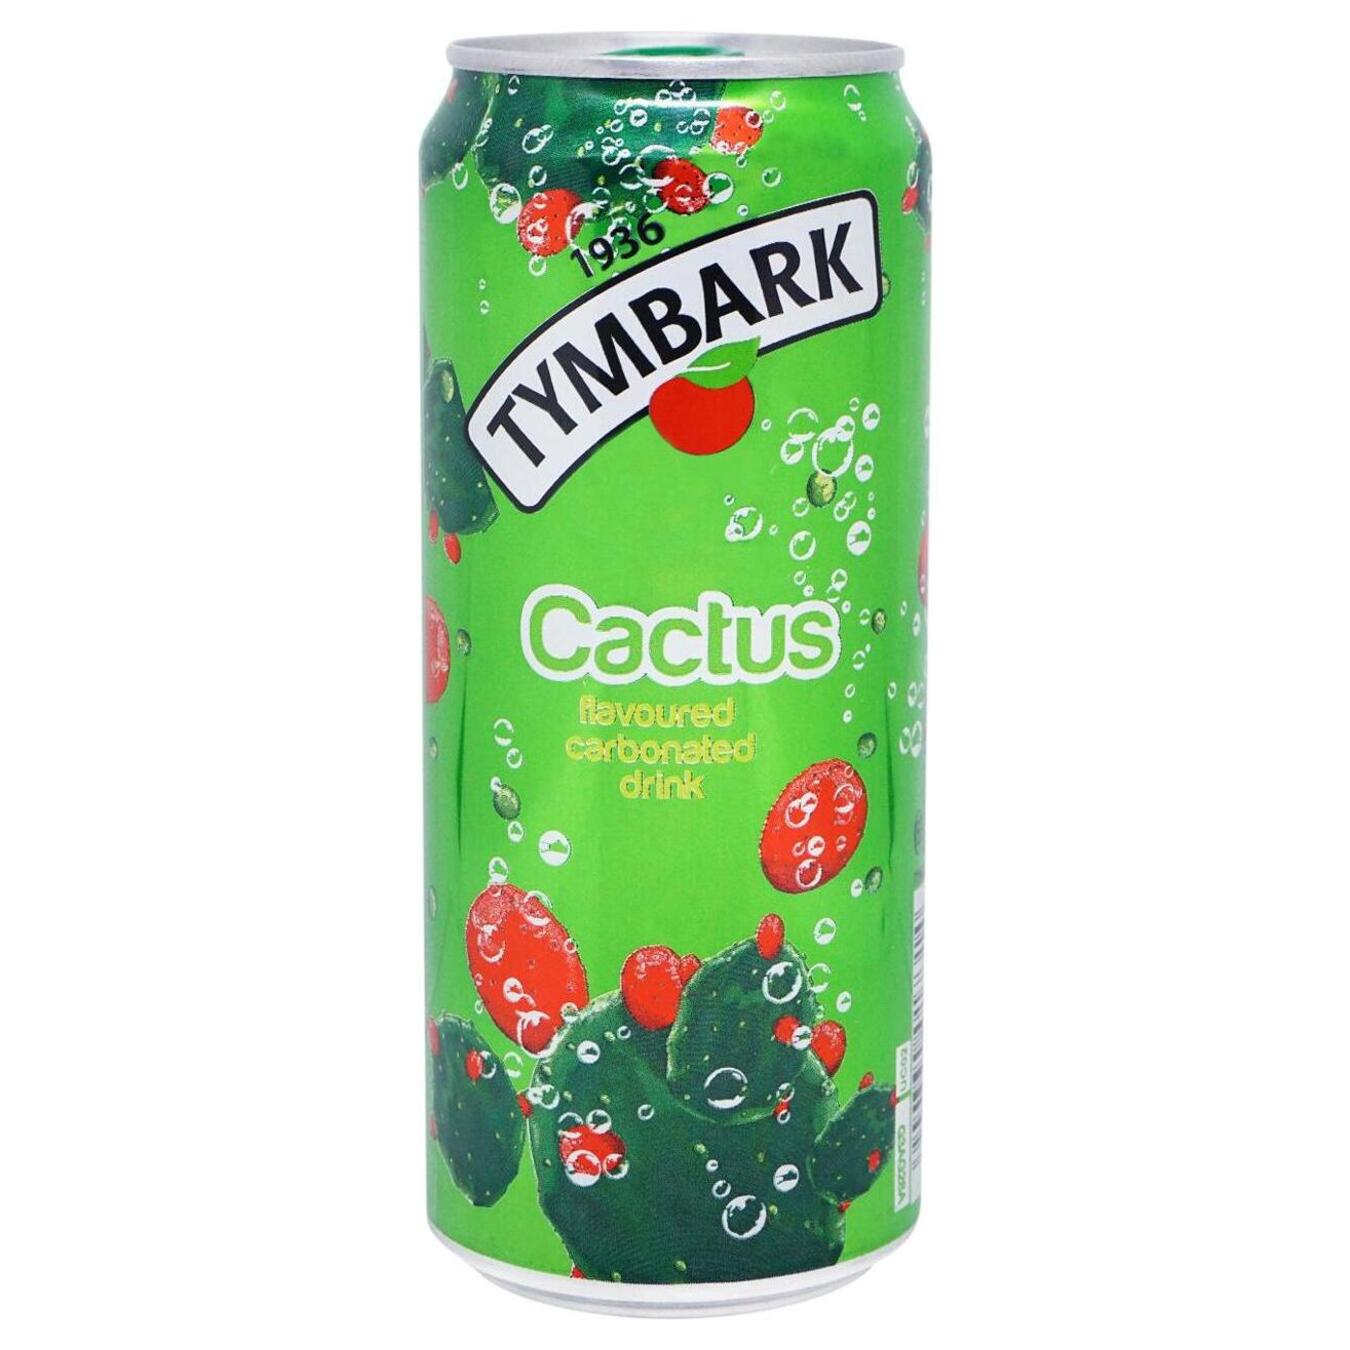 Carbonated drink Tymbark cactus 0.33 iron can